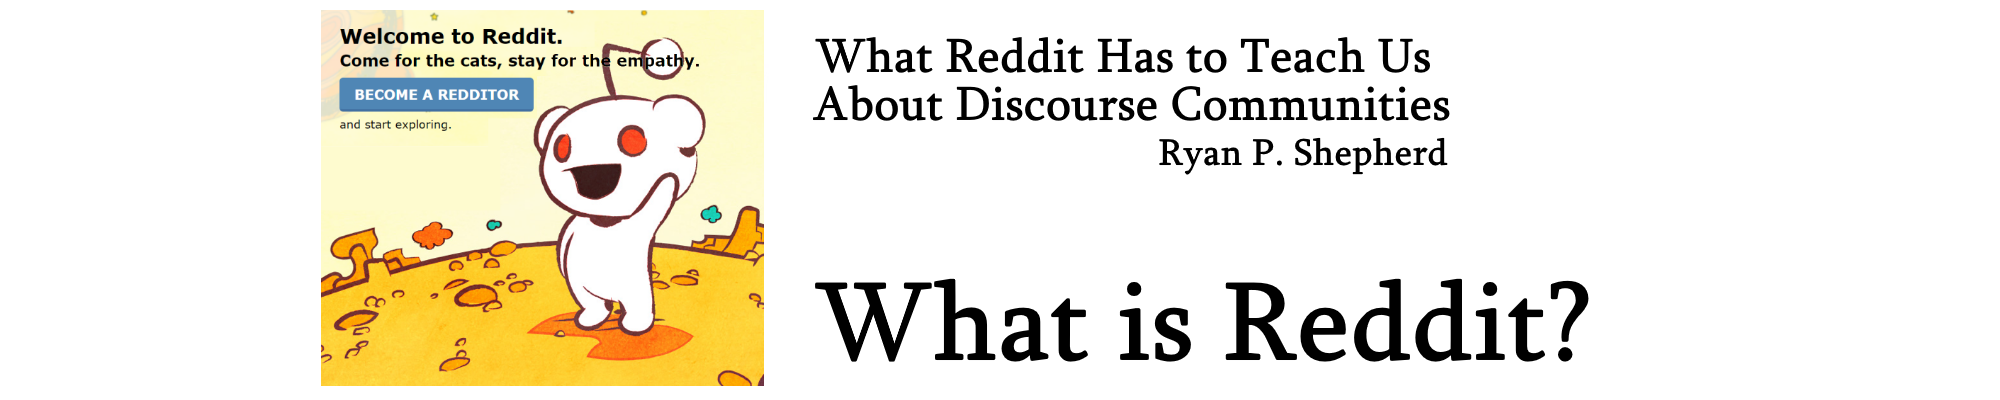 Banner Image Reads What Reddit Has to Teach Us About Discourse Communities and What is Reddit?